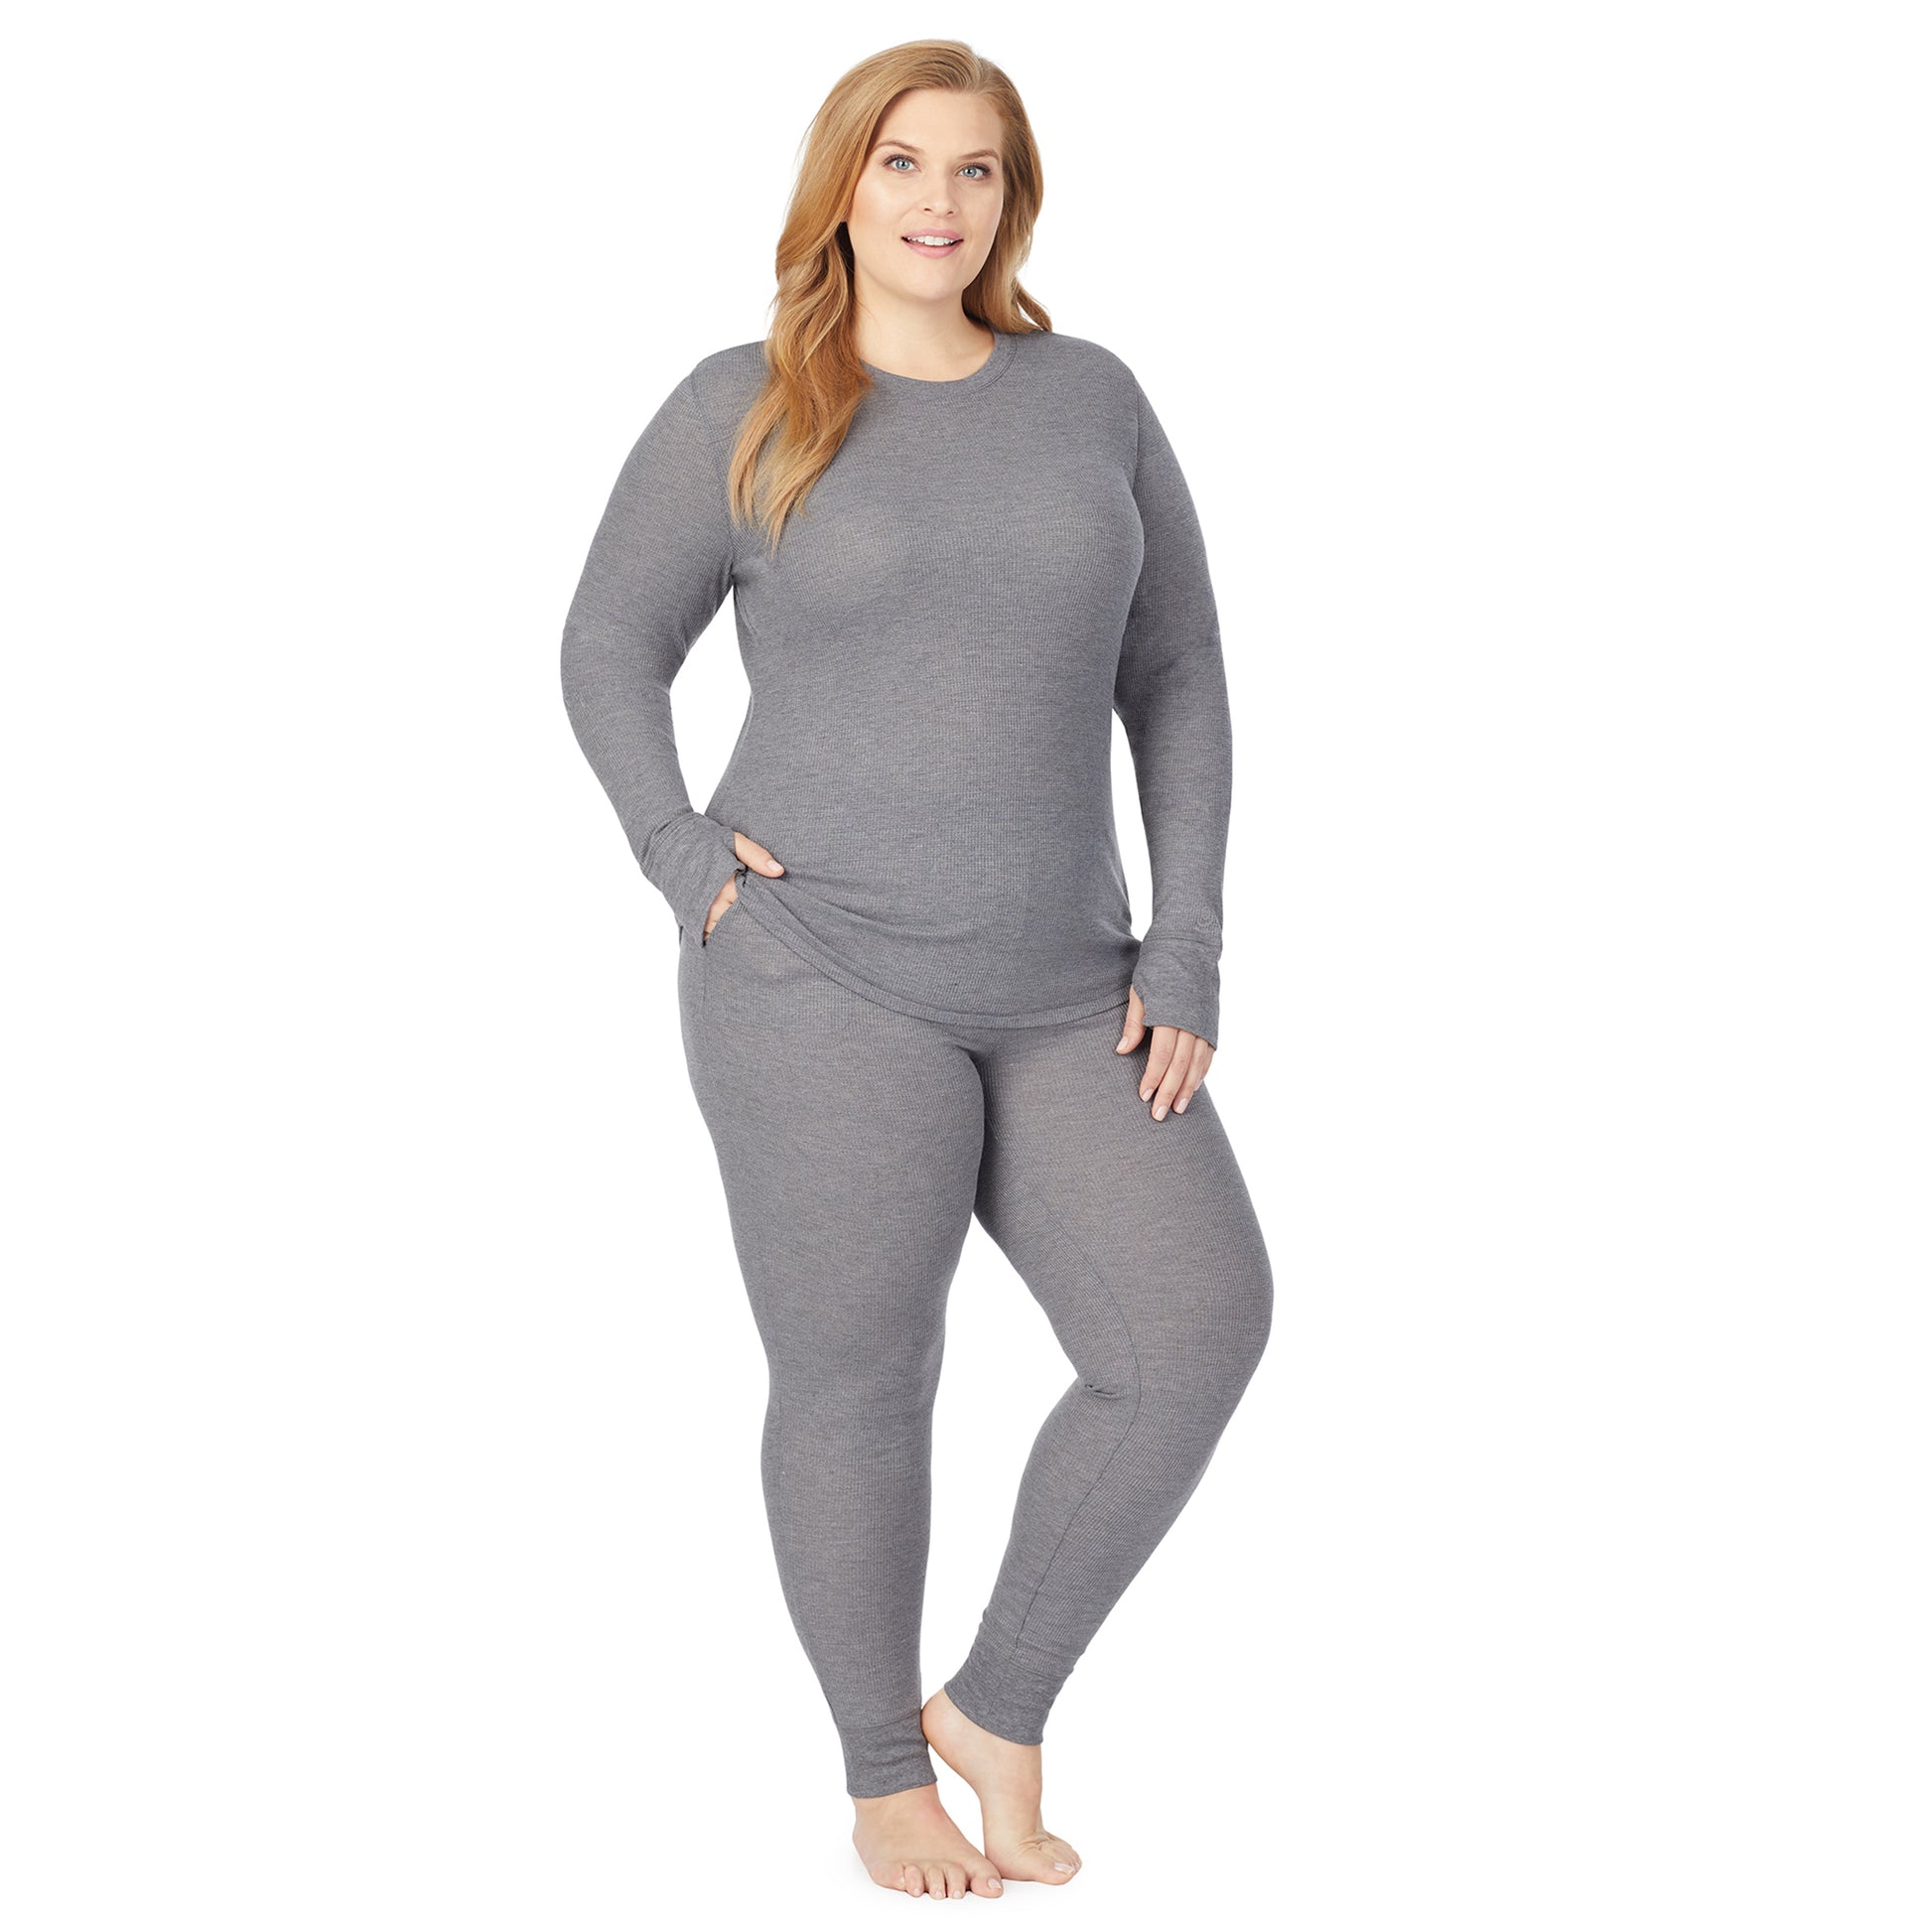 Stone Grey Heather;Model is wearing size 1X. She is 5'9", Bust 38", Waist 36", Hips 48.5". @A lady wearing a stone grey heather legging plus.